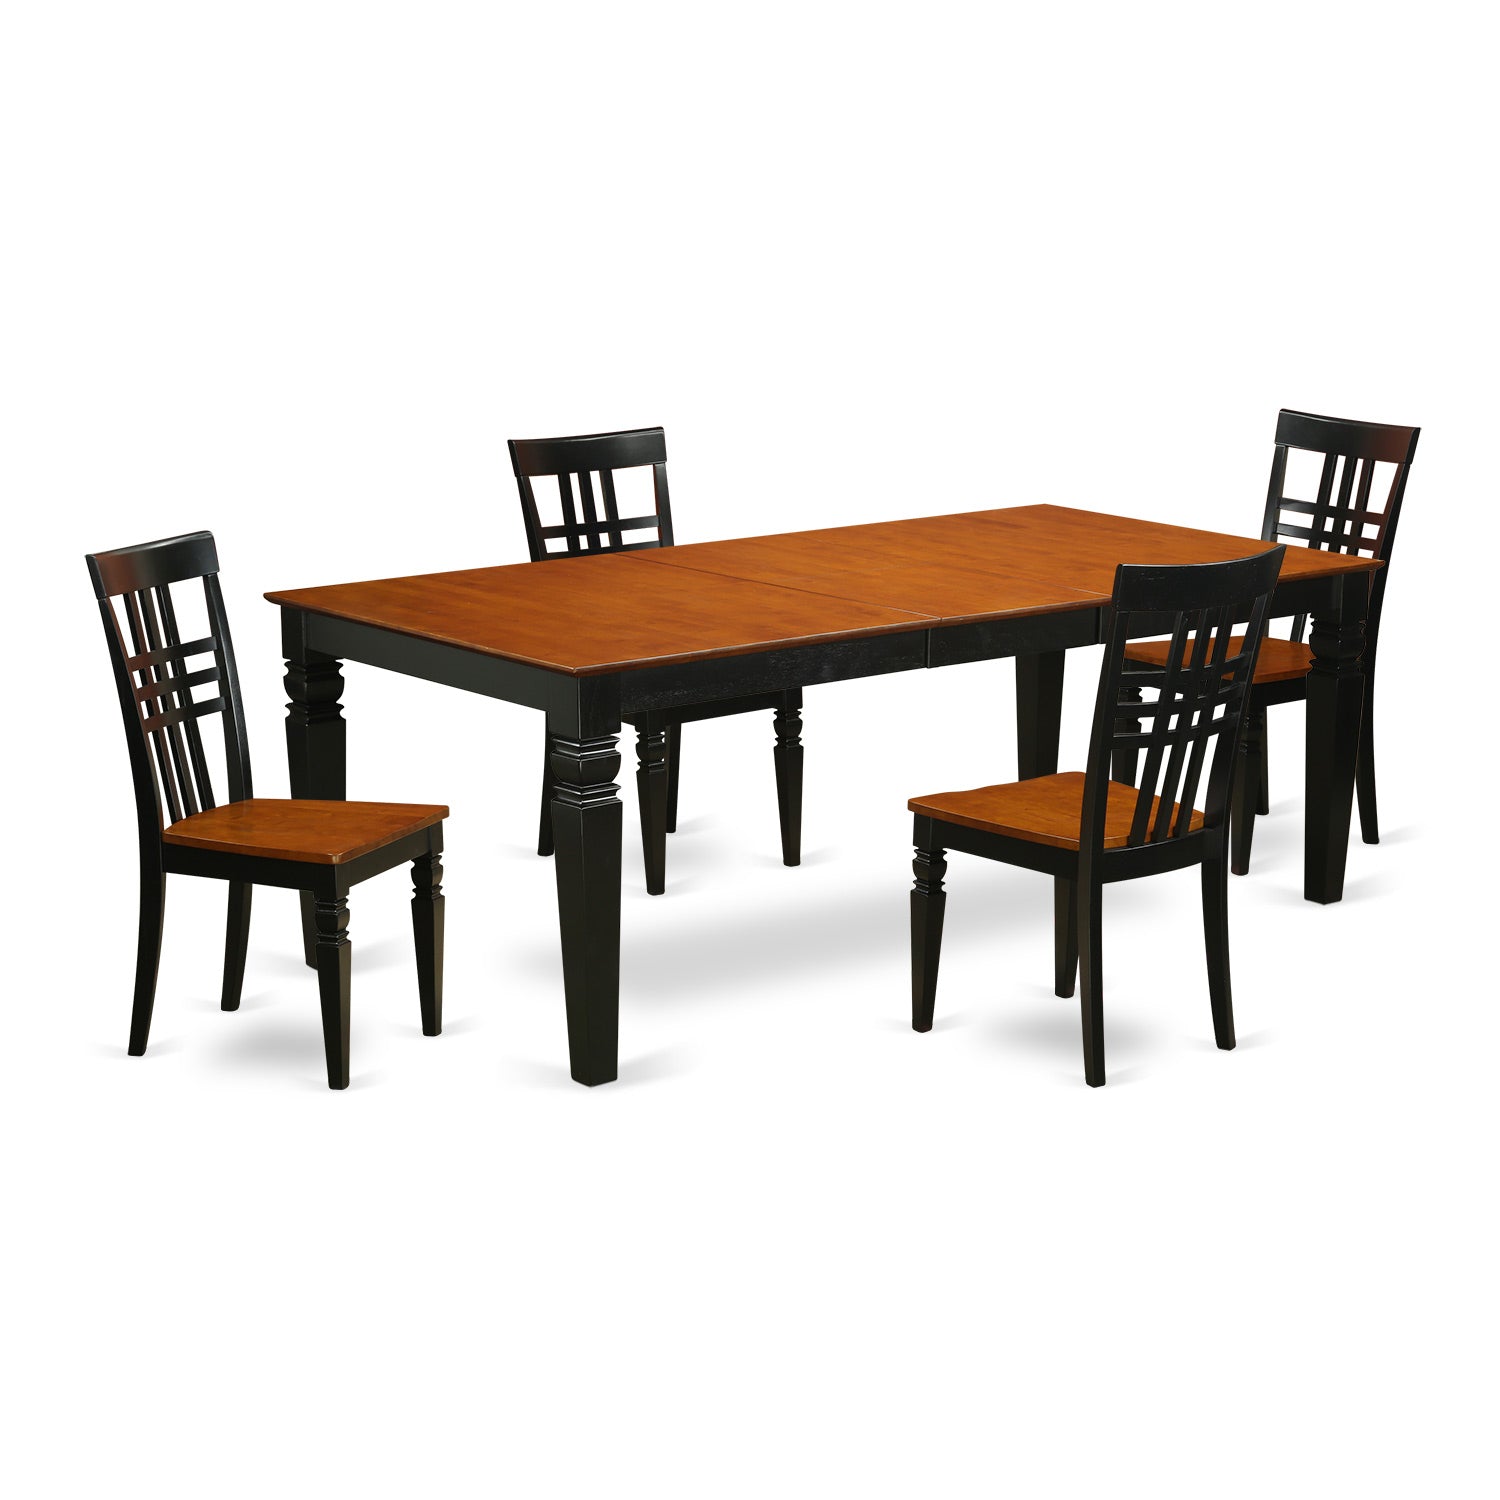 LGLG5-BCH-W 5 PC Table and chair set with a Table and 4 Dining Chairs in Black and Cherry